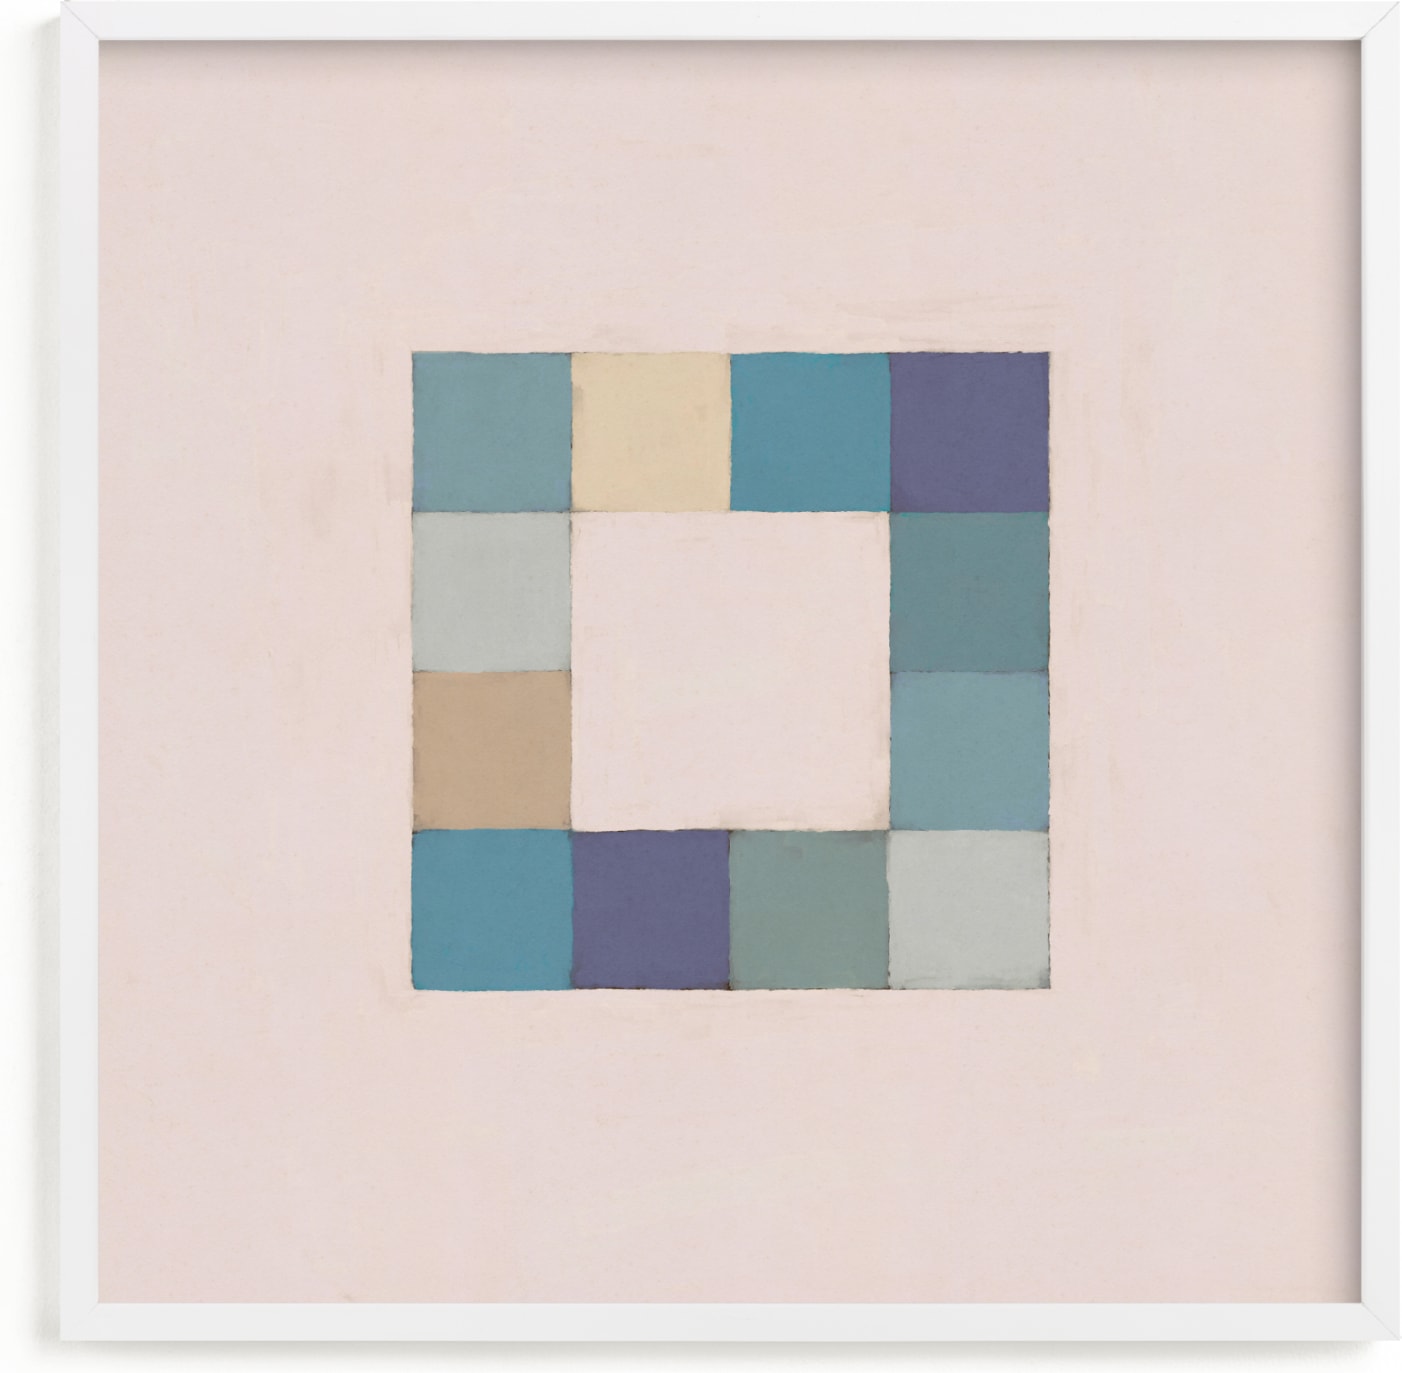 This is a blue art by Alisa Galitsyna called Squares.